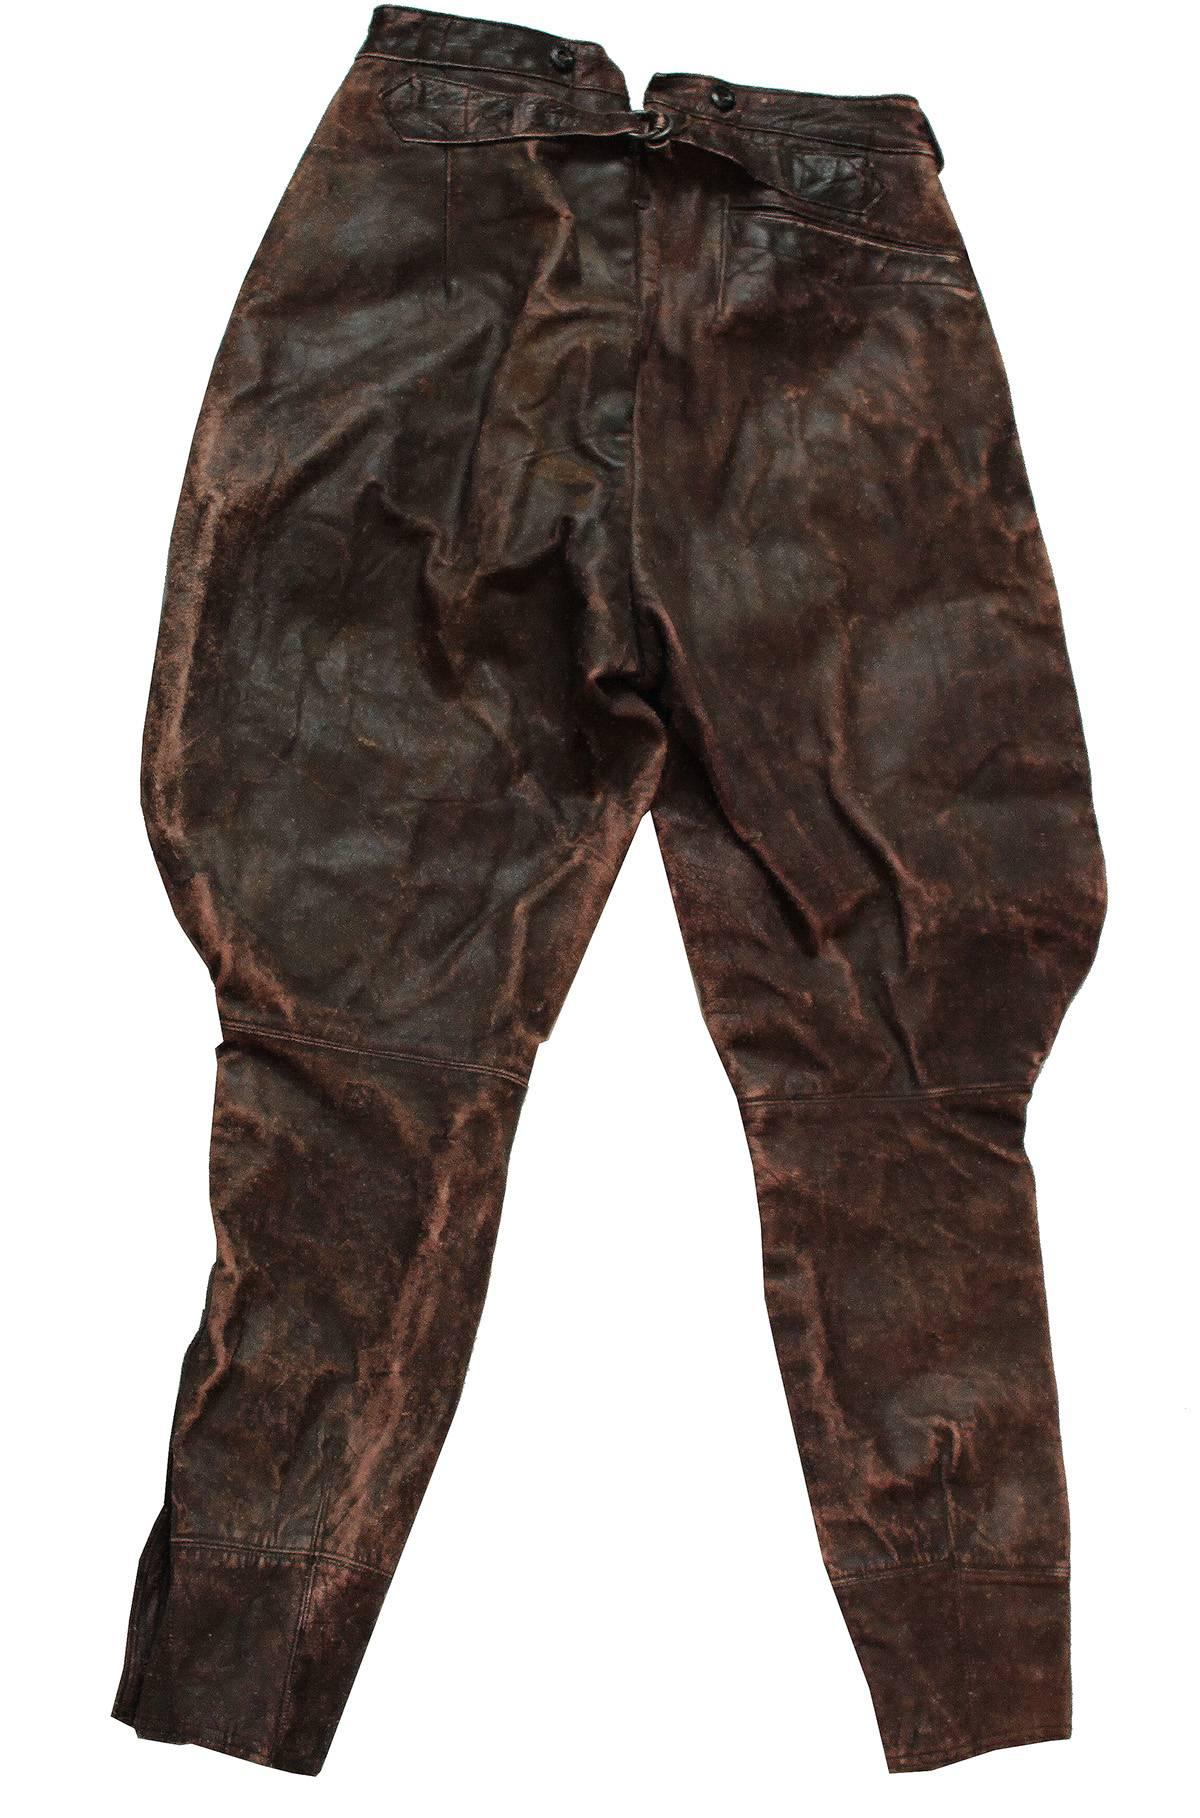 These are a pair of all leather riding pants from Europe.